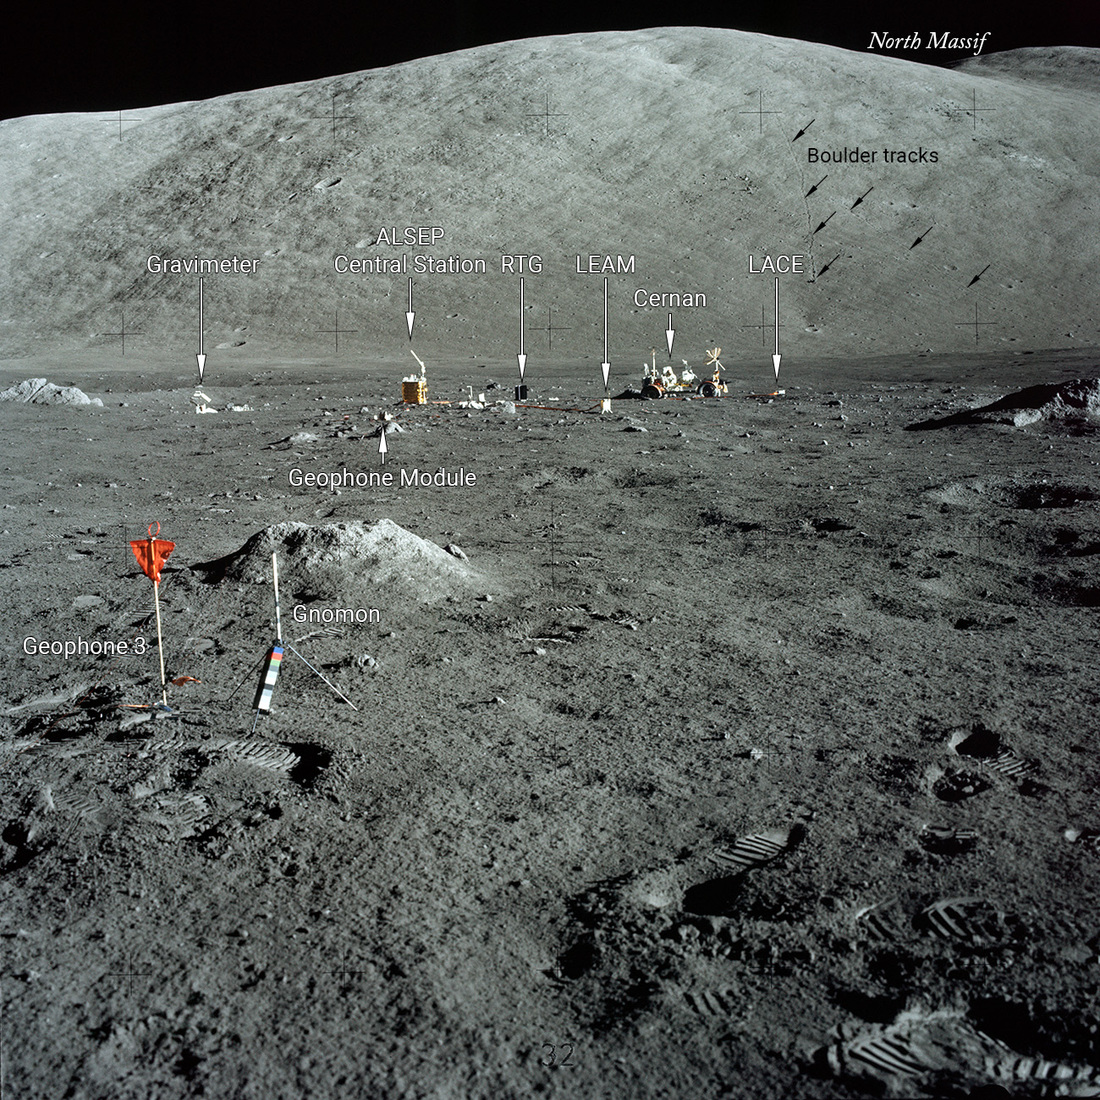 Apollo 17 handheld image AS17-147-22549 of the ALSEP station, Gene Cernan, and rover and surrounding hardware, including the ALSEP Central Station, Geophone Module, Gravimeter, RTG, LEAM, and LACE taken by Jack Schmitt from Geophone 3 looking North against the North Massif.